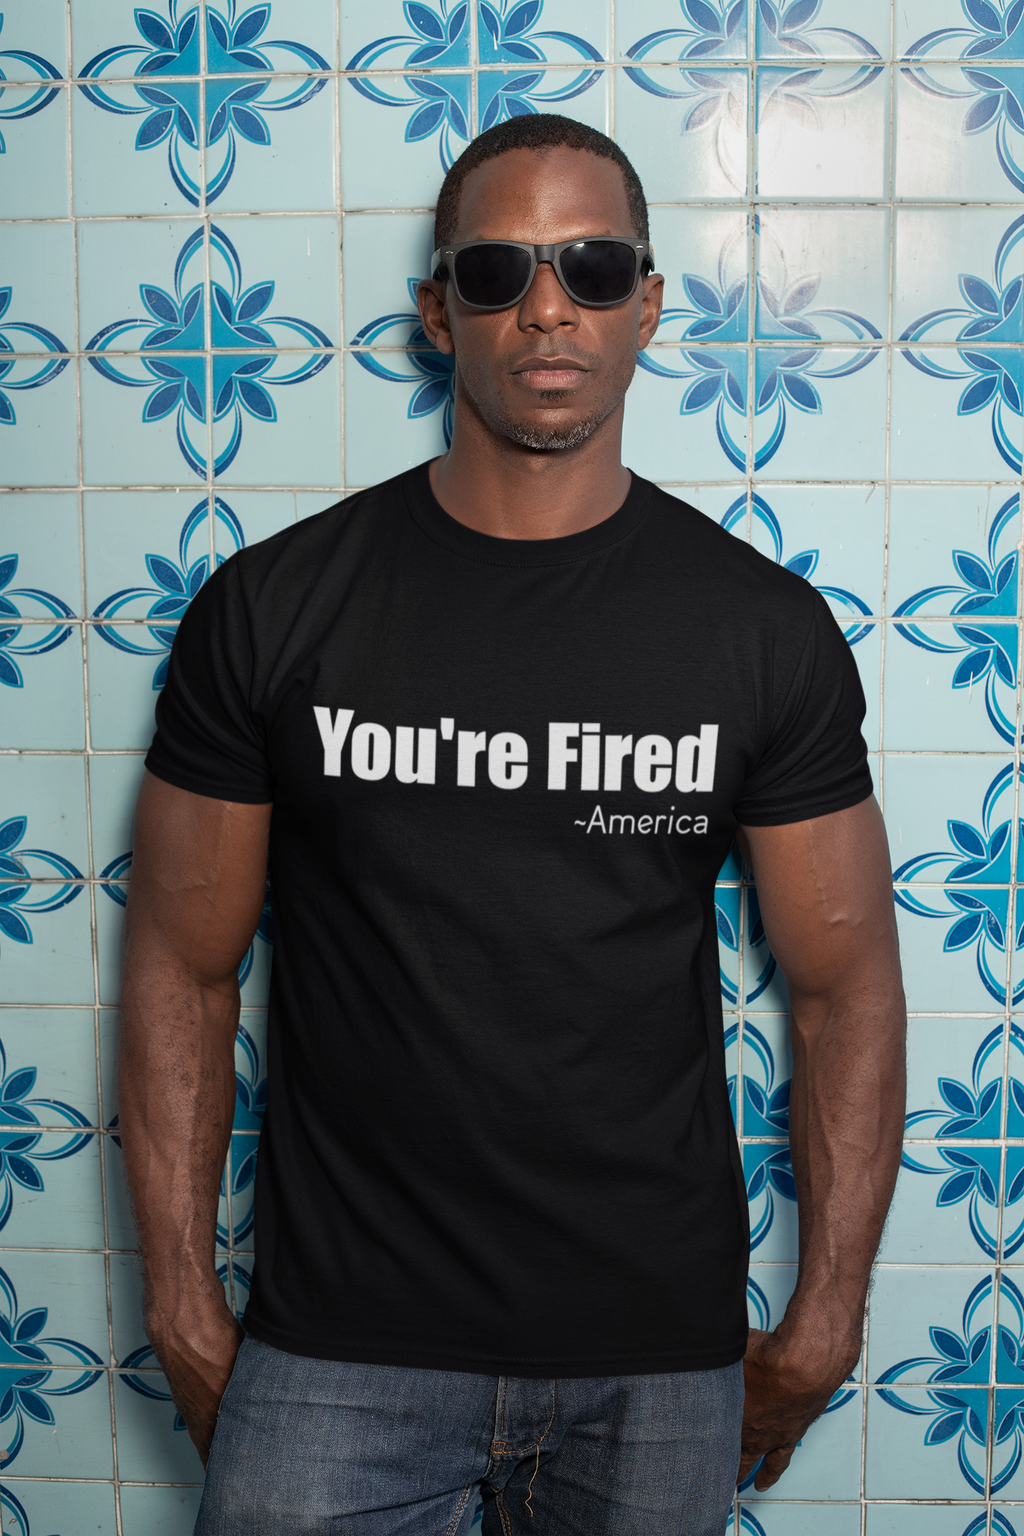 You're FIRED